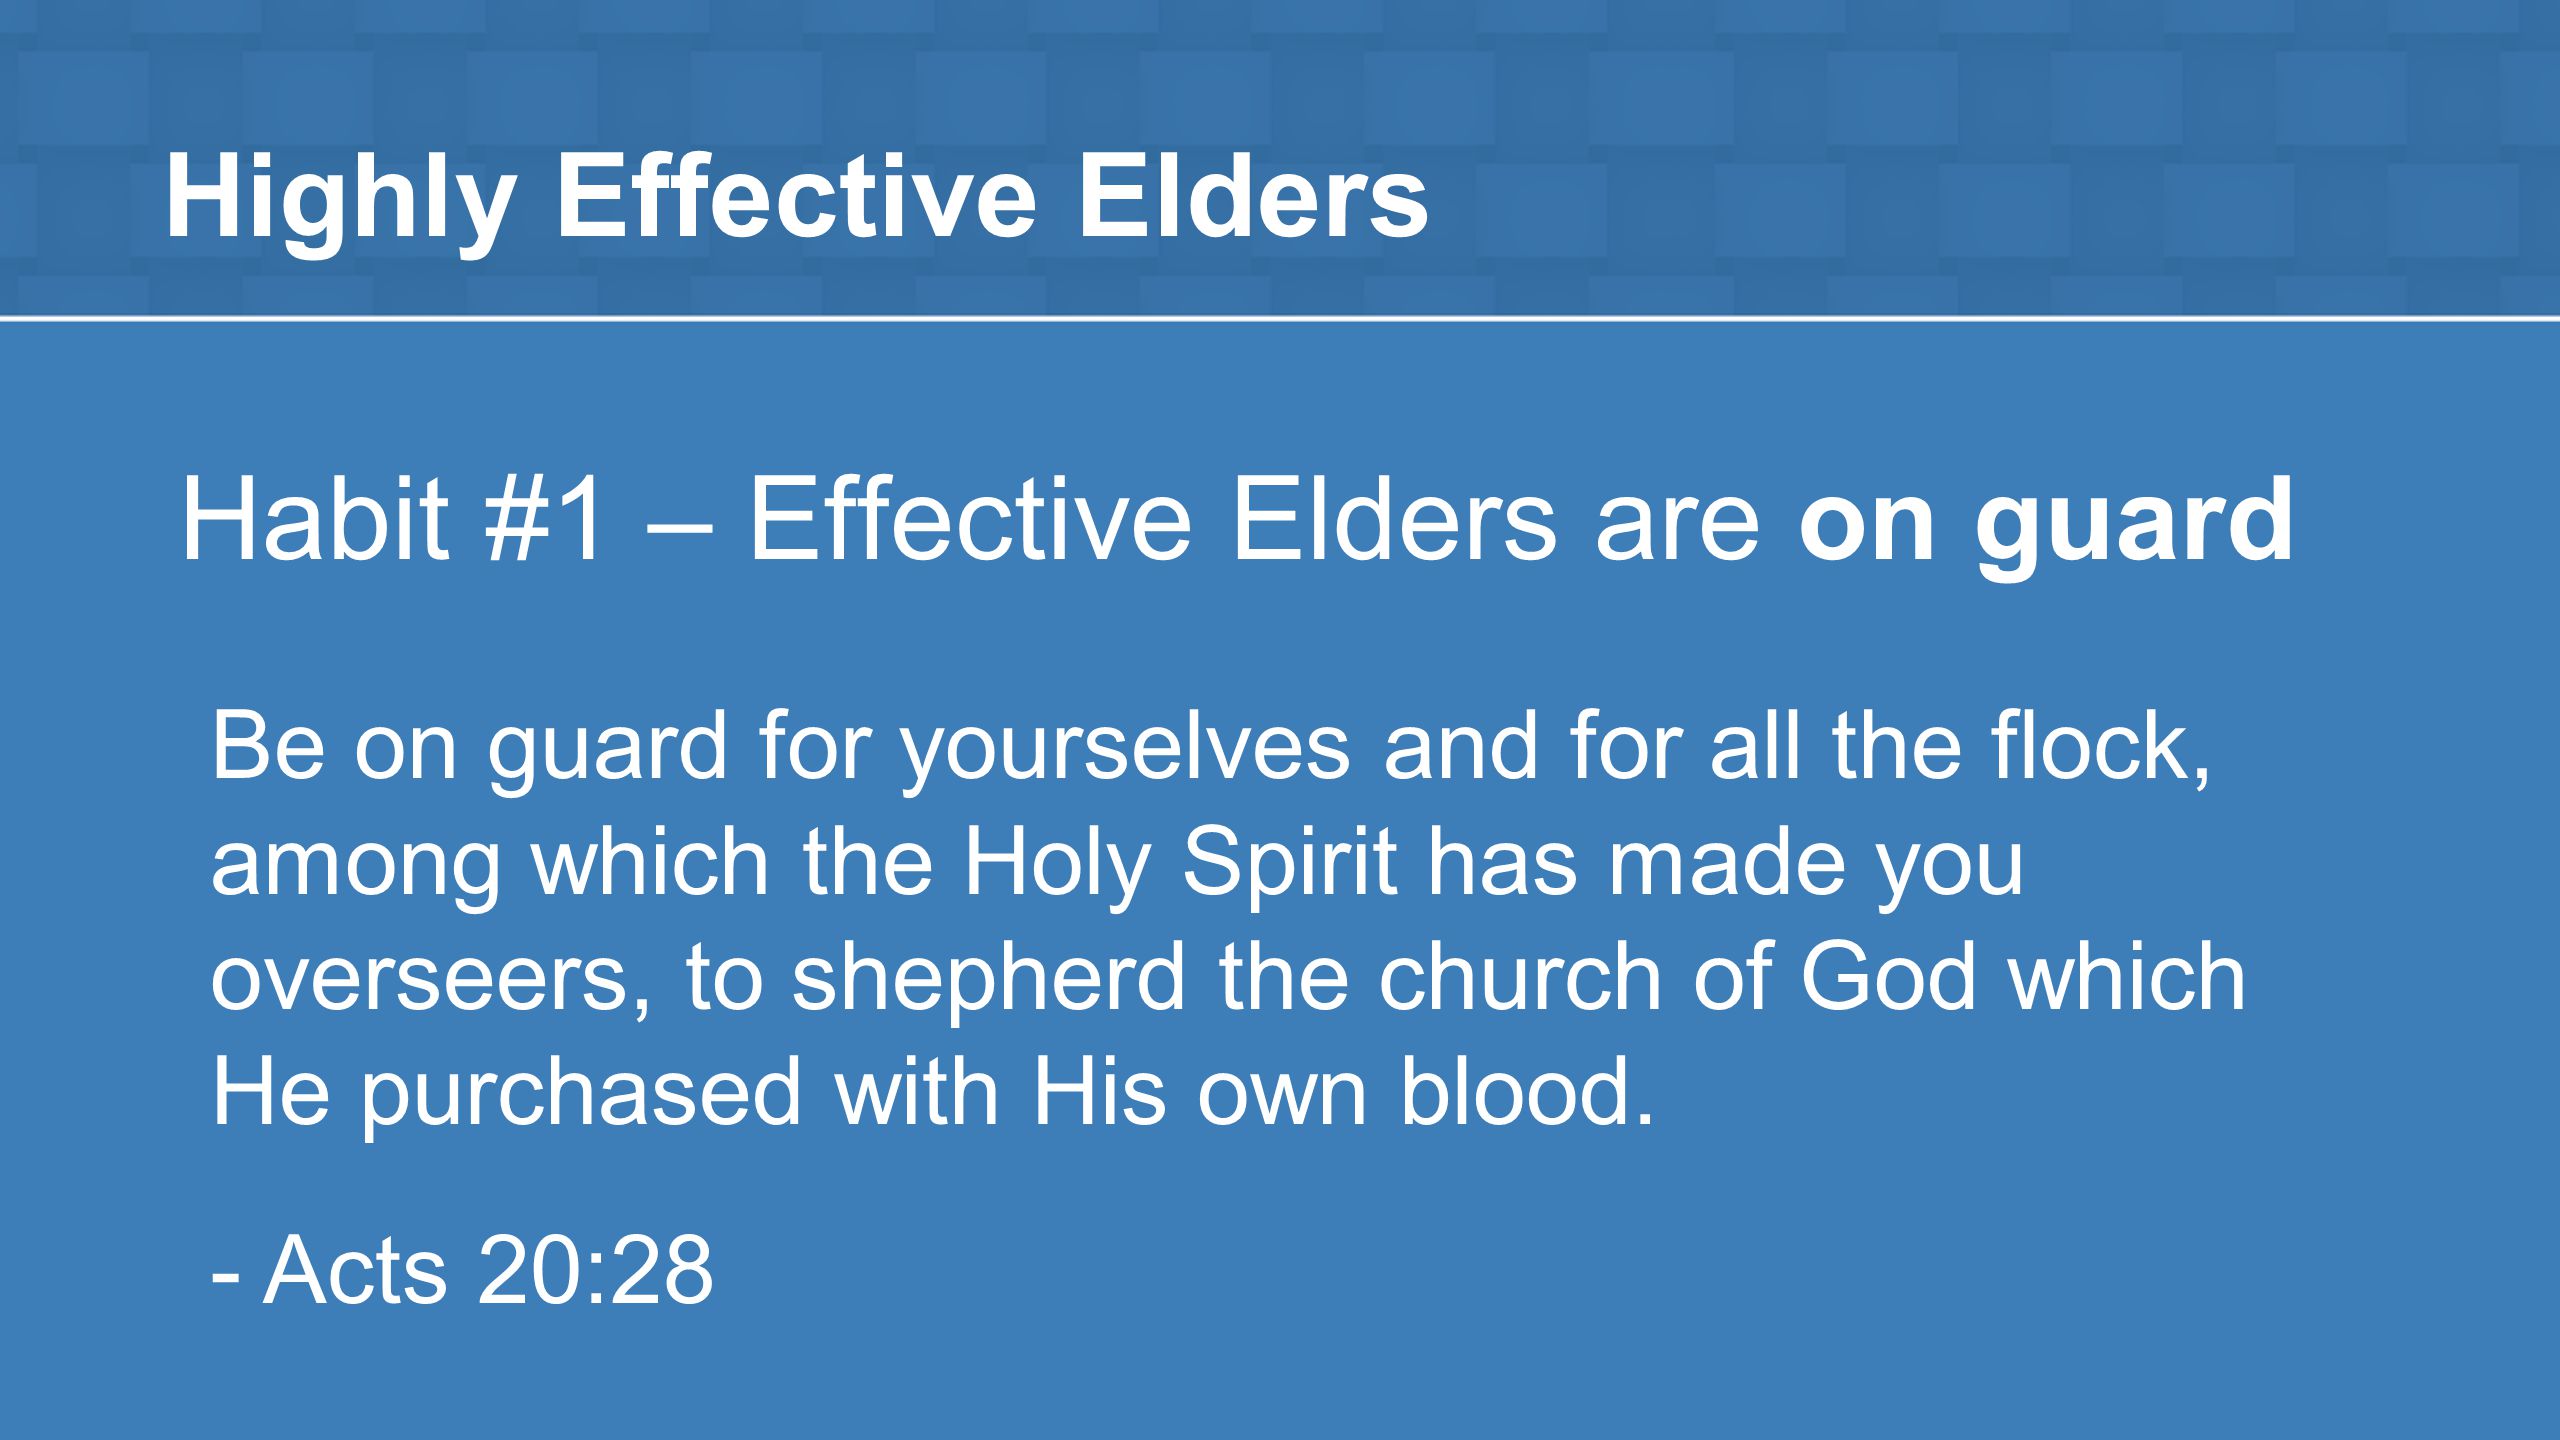 Highly Effective Elders Habit #1 – Effective Elders are on guard Be on guard for yourselves and for all the flock, among which the Holy Spirit has made you overseers, to shepherd the church of God which He purchased with His own blood.